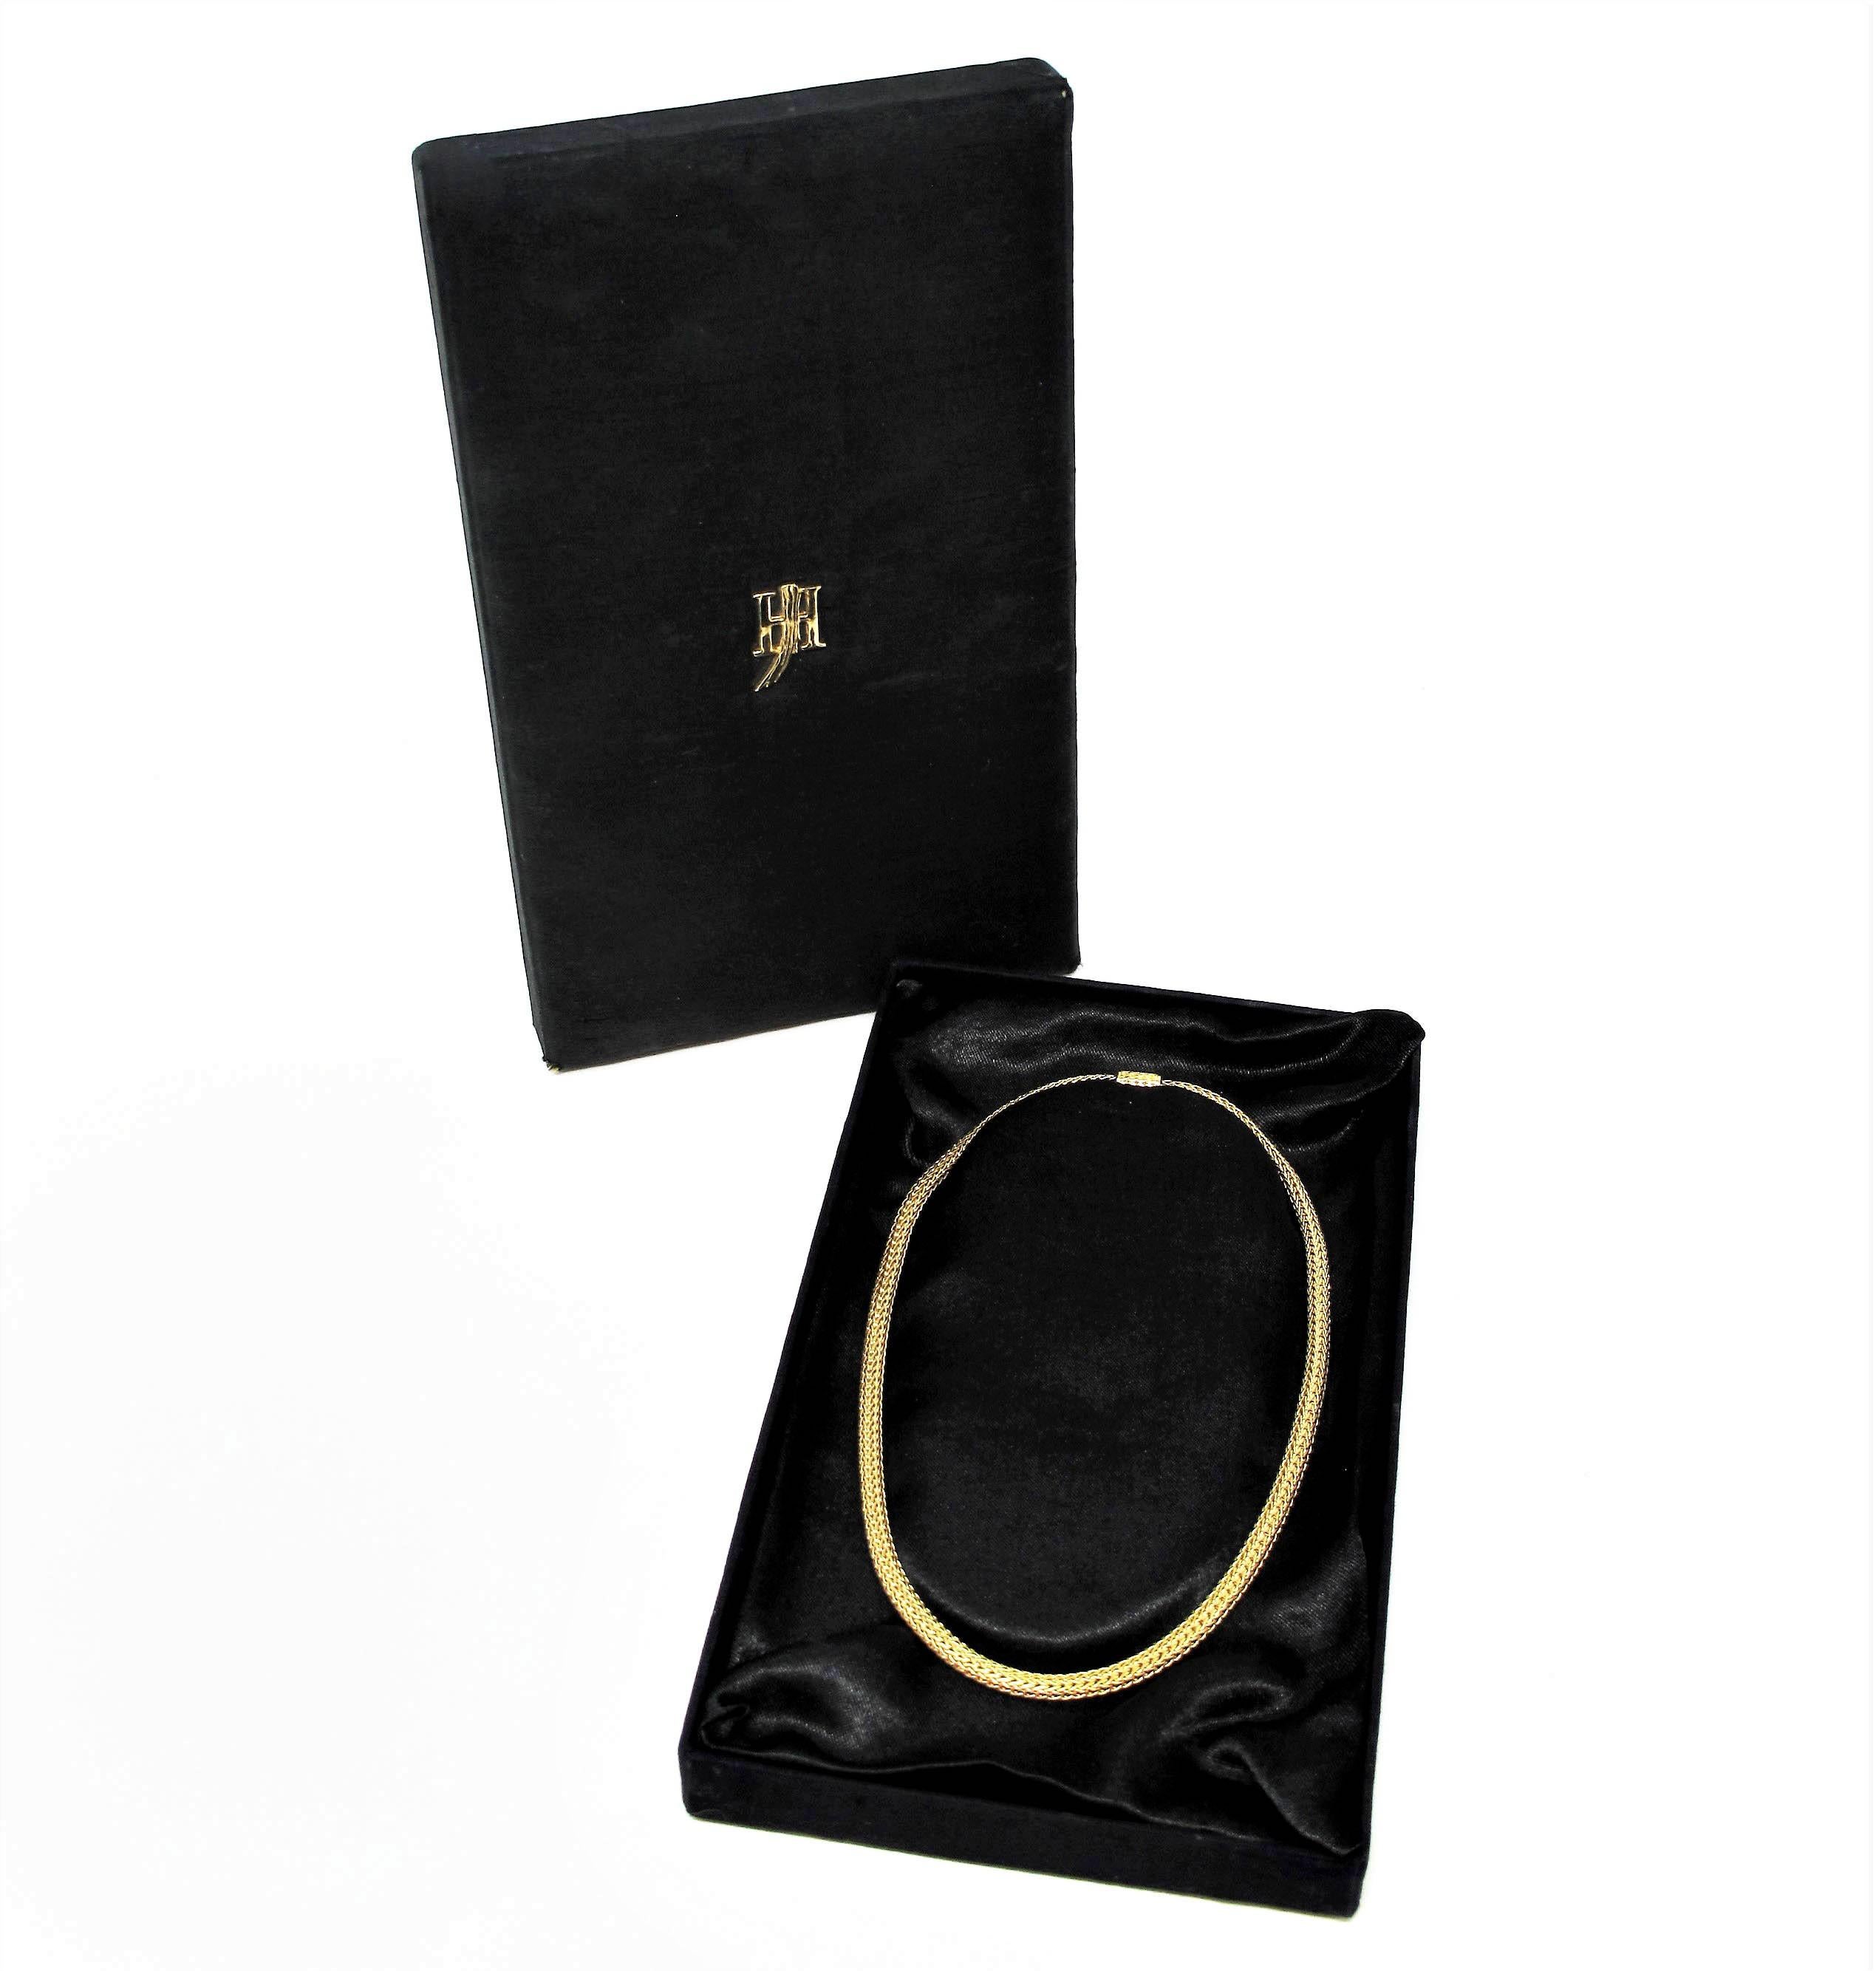 Absolutely timeless 18 karat yellow gold chain necklace from esteemed jewelry designer, John Hardy. With its simple, yet classic style, the possibilities are endless! Layer with other necklaces, enhance with a unique pendant, or simply wear on its